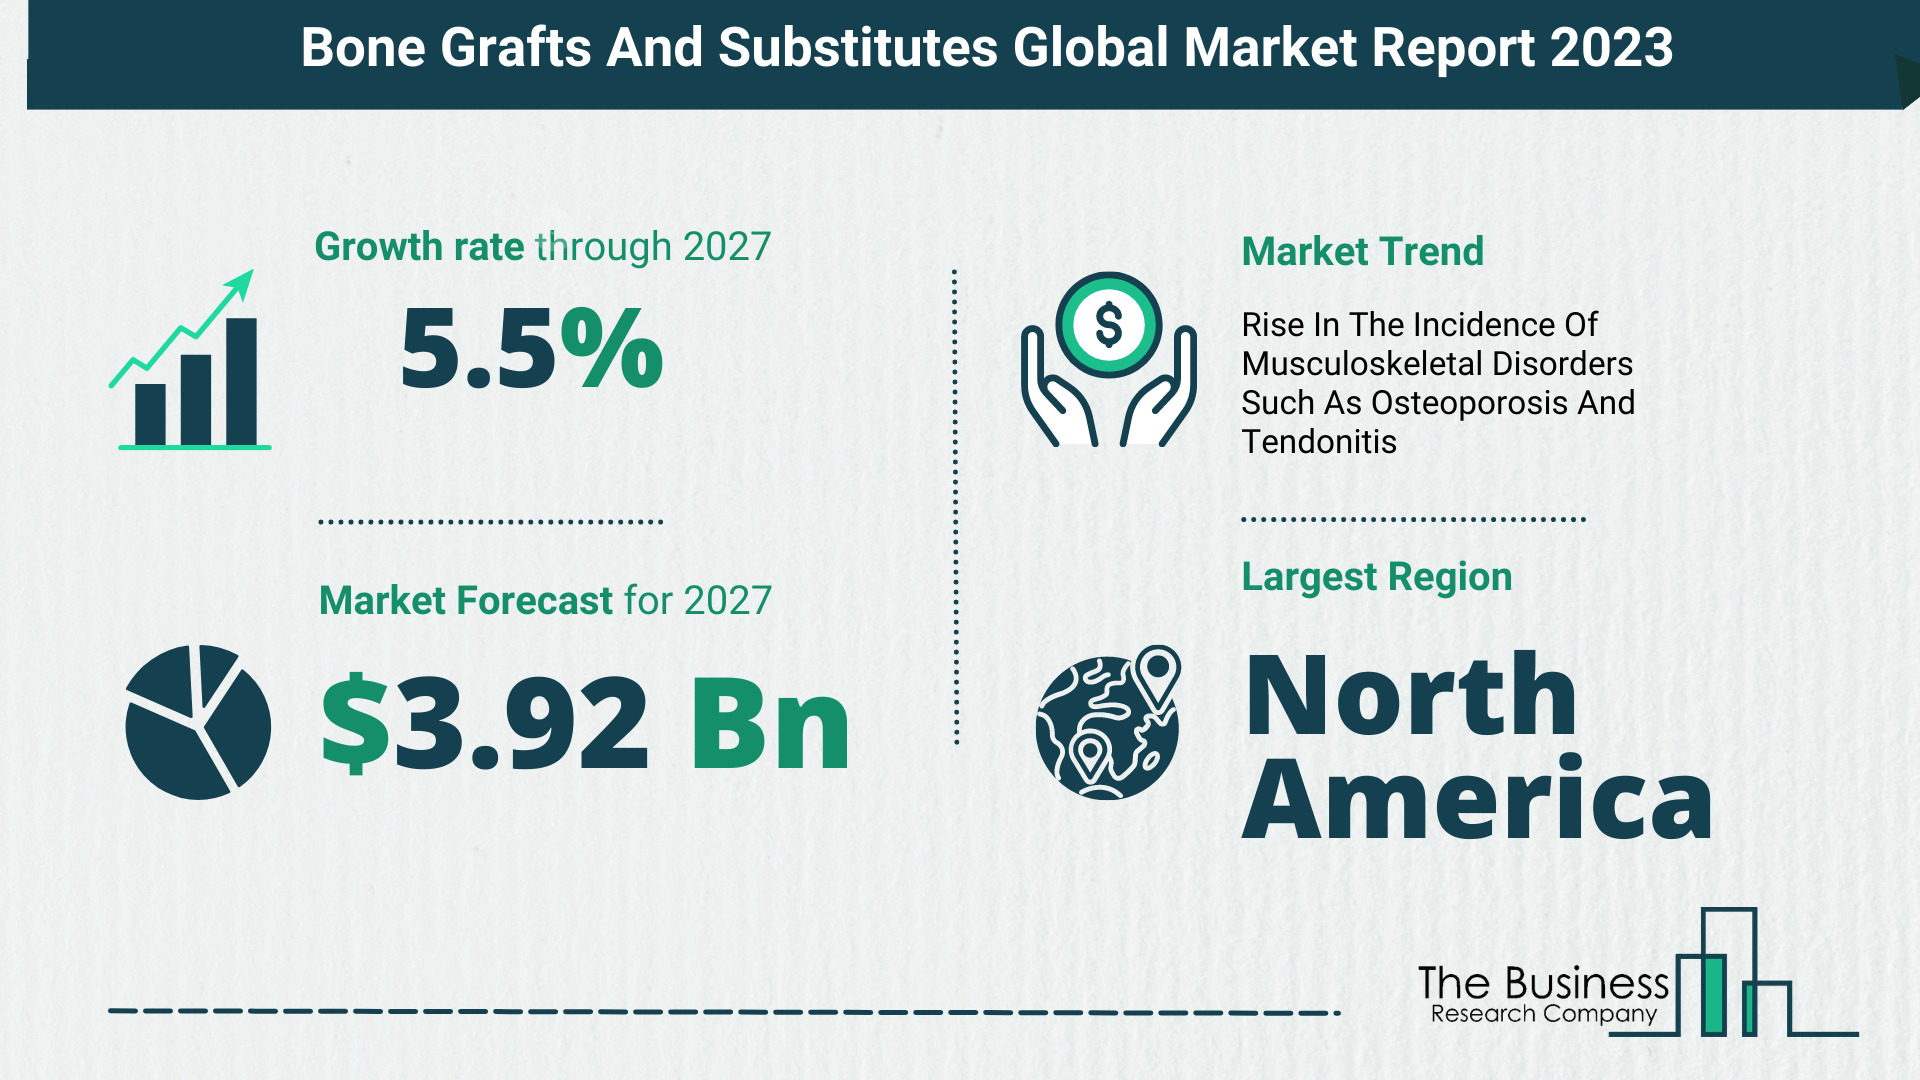 Bone Grafts And Substitutes Market Overview: Market Size, Drivers And Trends